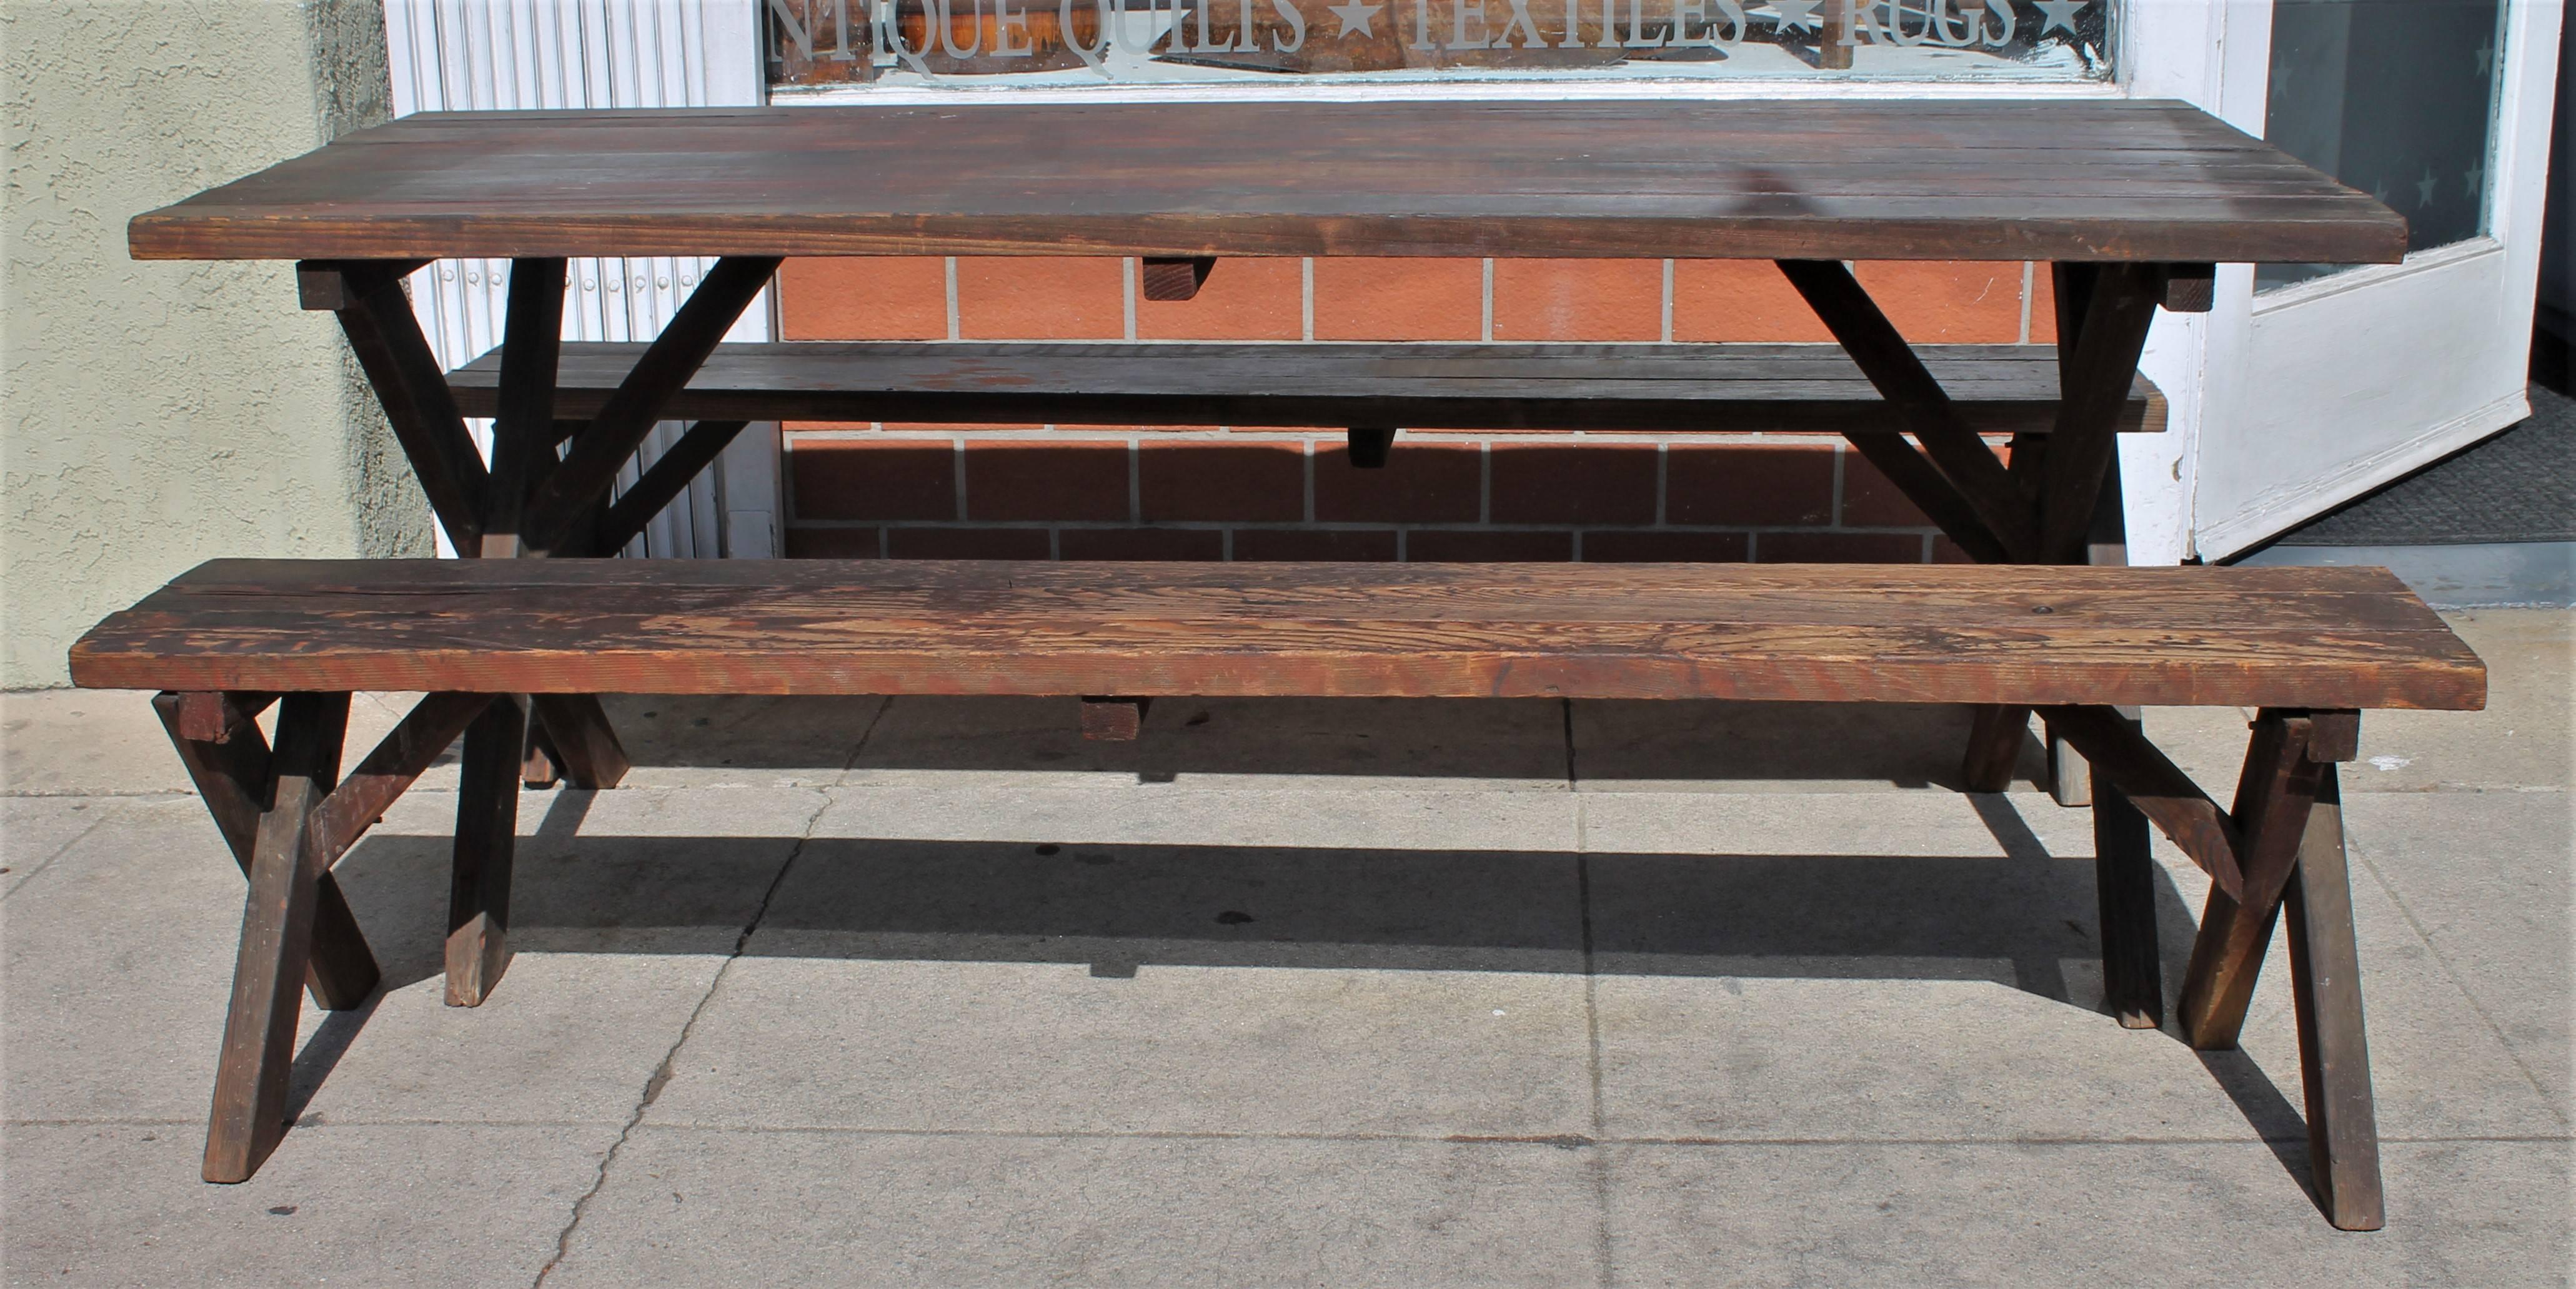 This rustic table measures 70 wide x 27 deep x 27 high. This set was found at a cabin at Big Bear. It has a wonderful worn and mellow patina.
The condition is very strong and sturdy. The aged patina and wear is fantastic.
 The Bench's measures 70